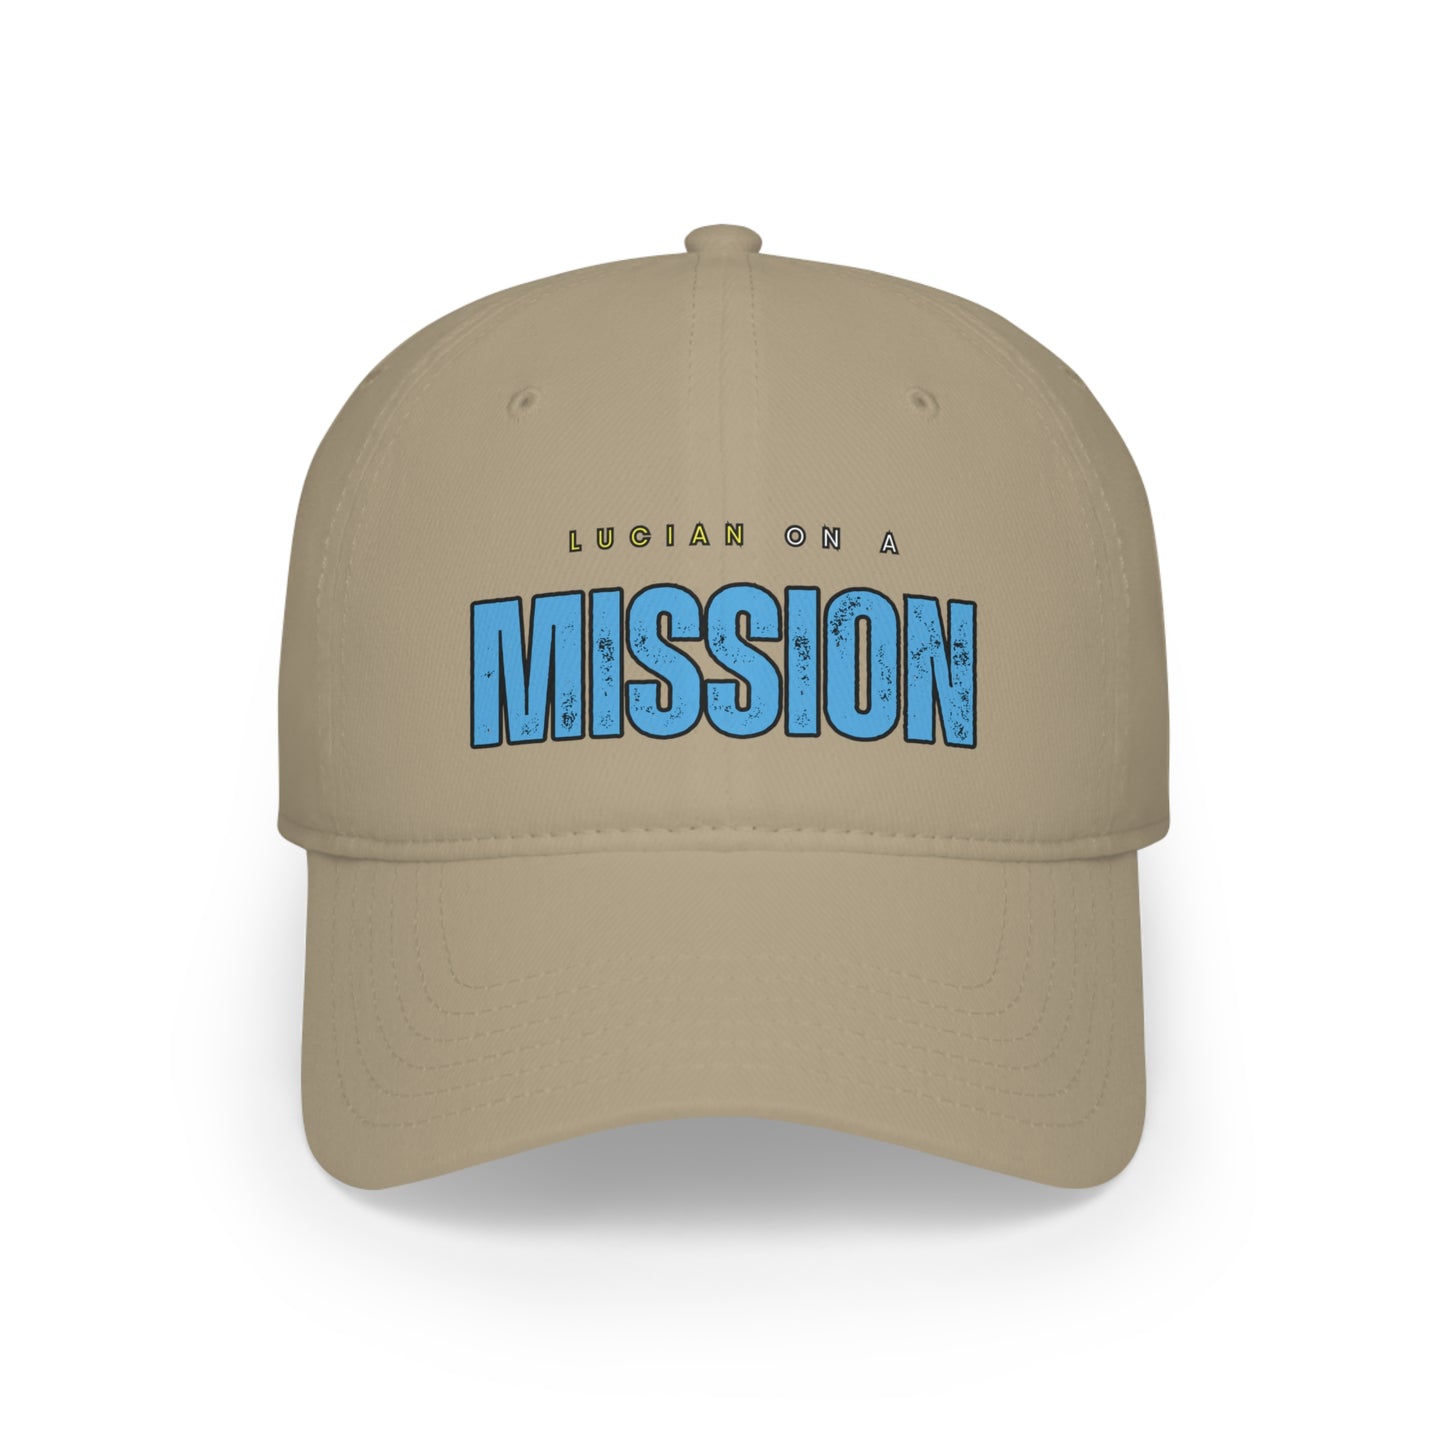 Lucian on a Mission Profile Baseball Cap